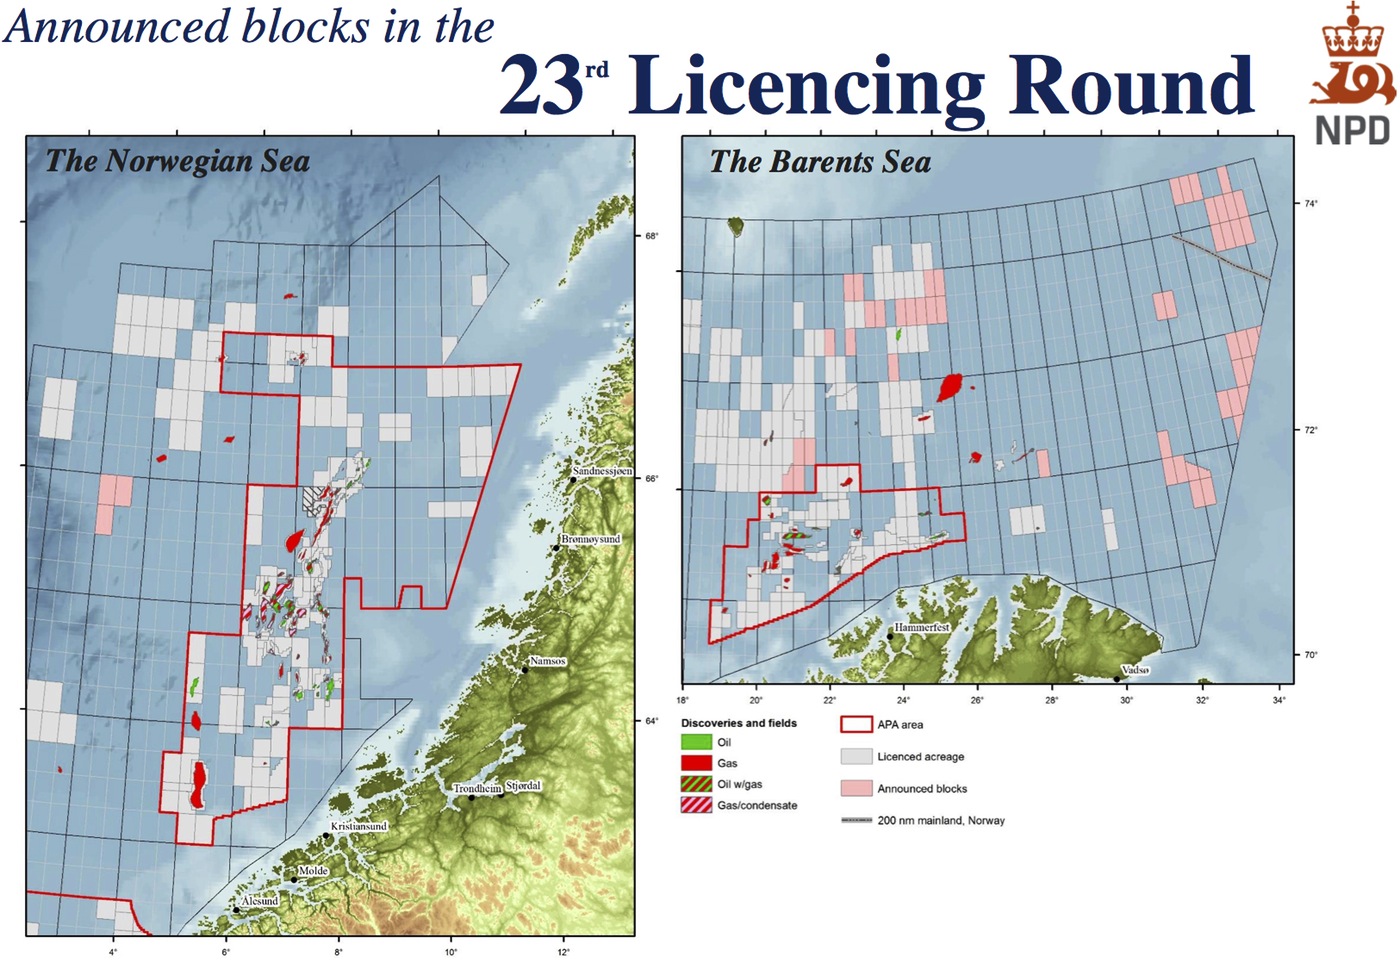 The Norwegian Sea and The Barents Sea oil locations